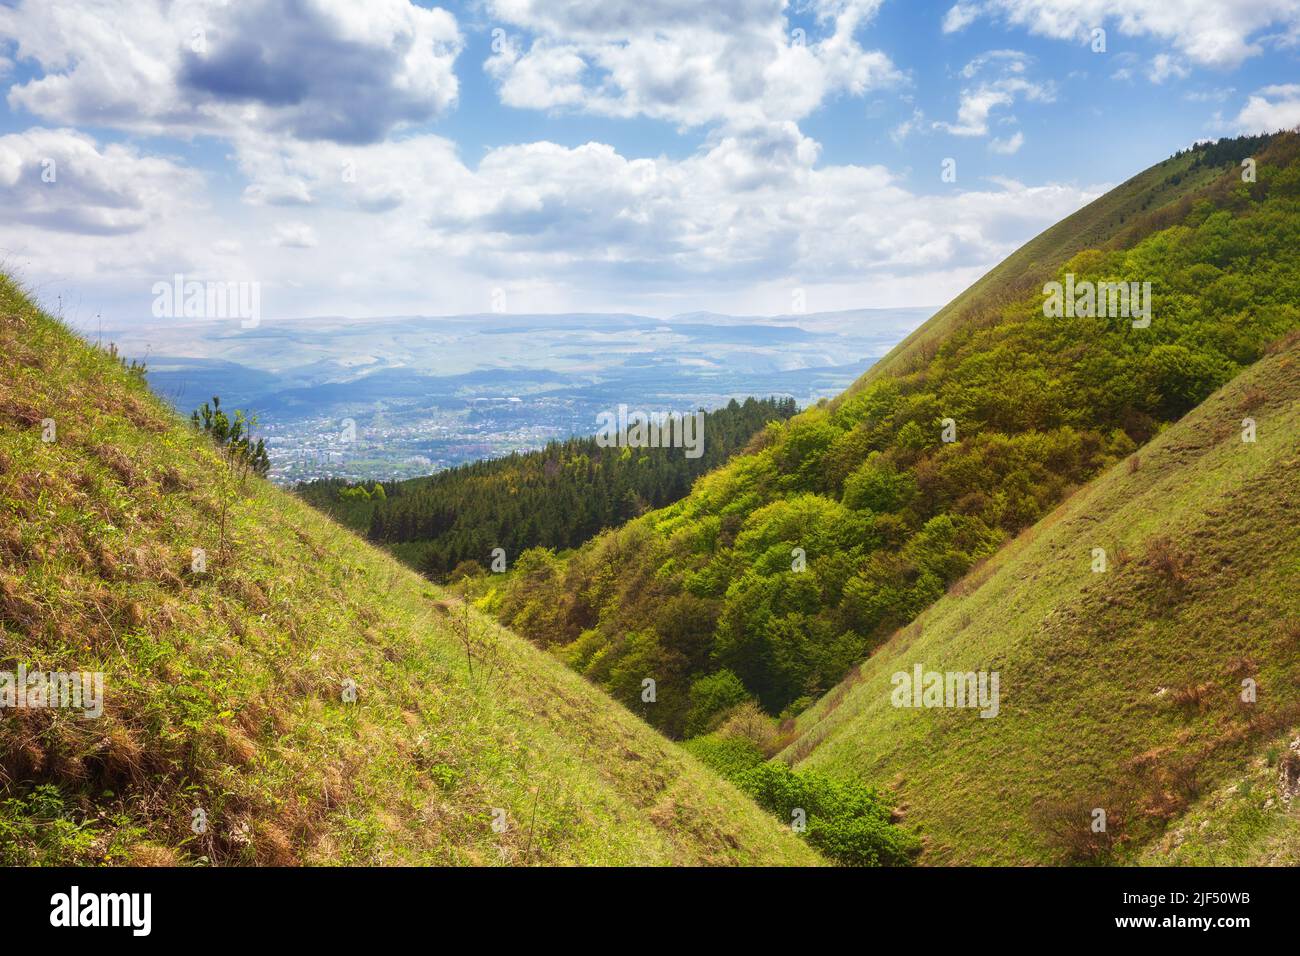 Meadows and forests on the slopes of the Borgustan Range, North Caucasus Stock Photo